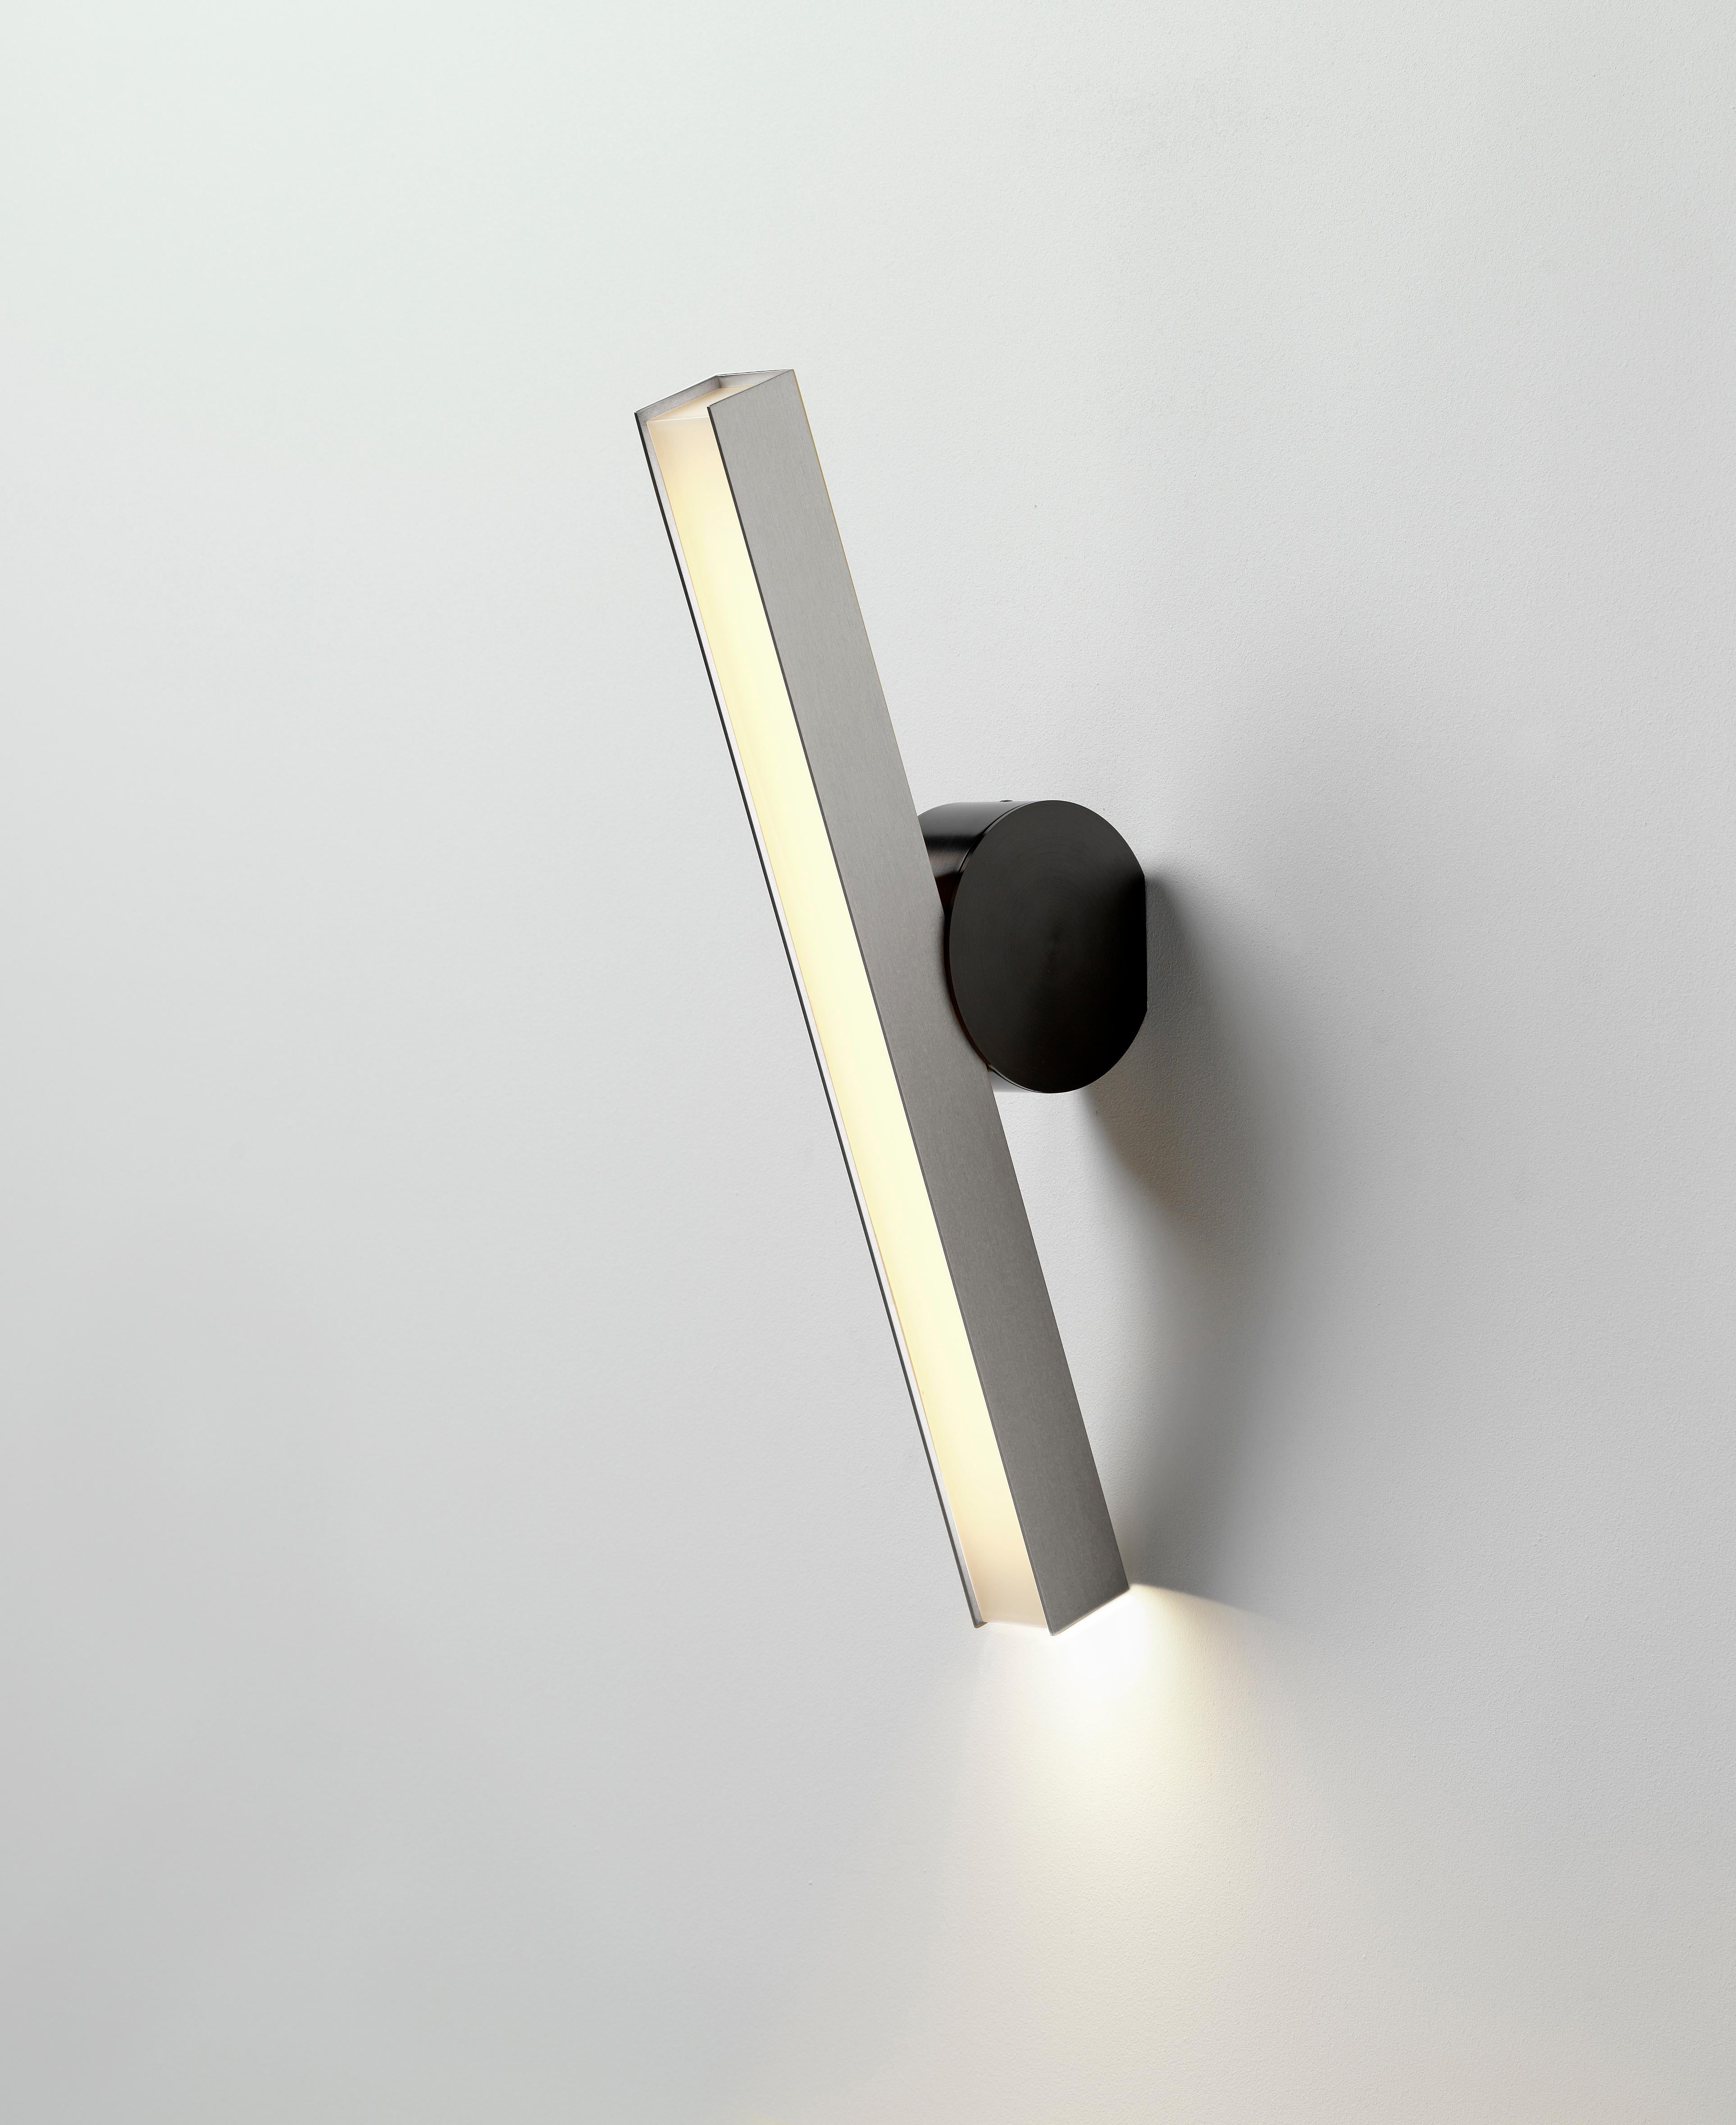 IP Calee V3 satin graphite and brass wall light by POOL
Dimensions: D20 x W4.4 X H45 cm
Materials: solid brass, satin nickel, satin brass
Others finishes and dimensions available.

All our lamps can be wired according to each country. If sold